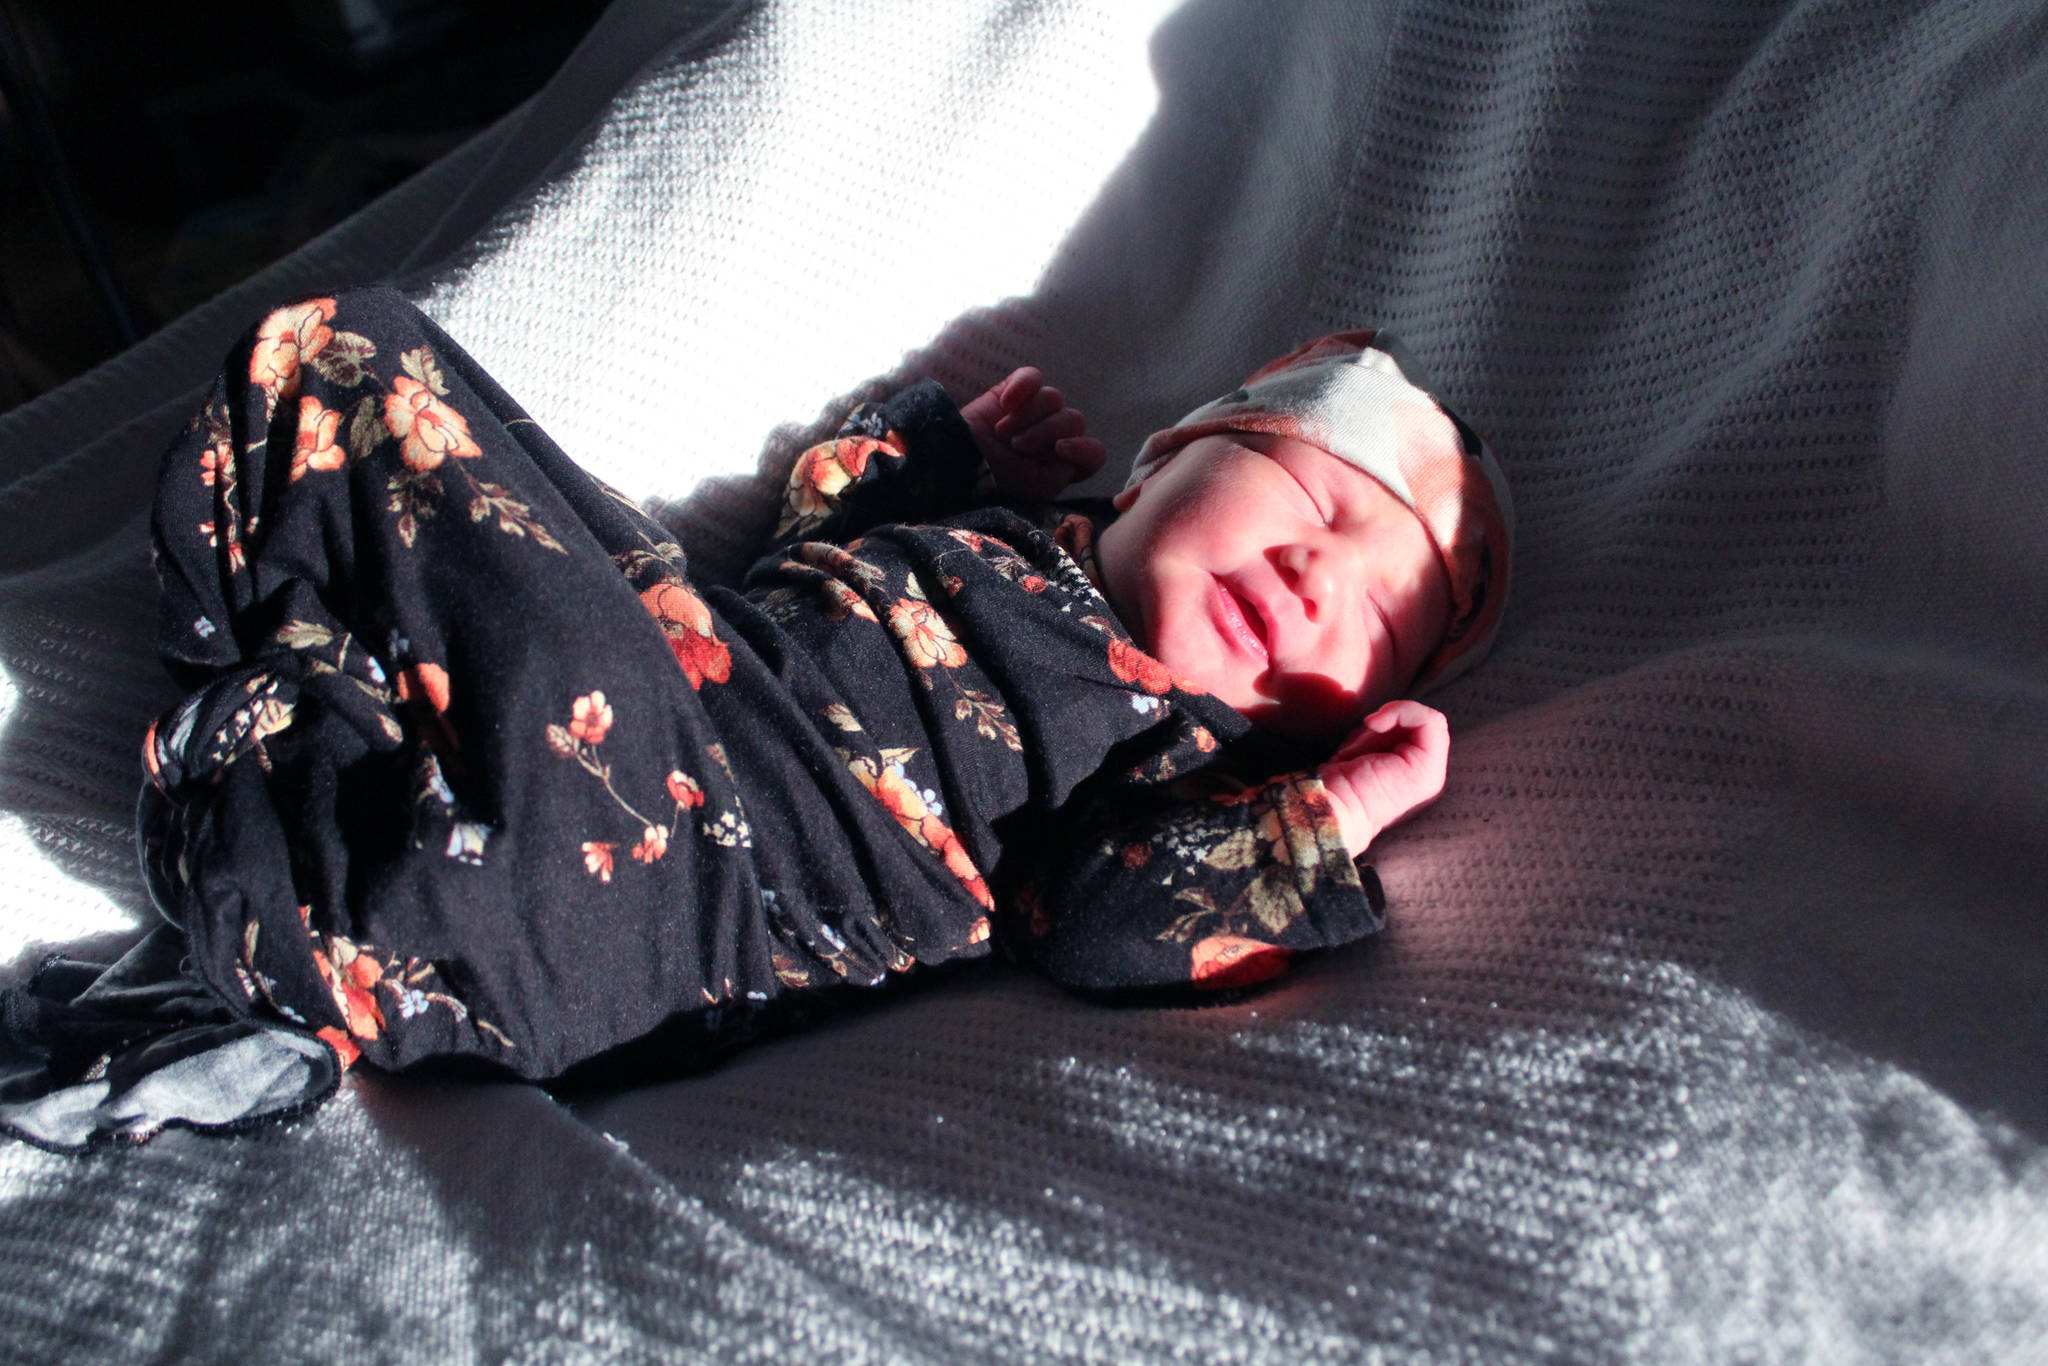 Brooke Addison Buzga stretches in the sun Friday, Jan. 5, 2018 at South Peninsula Hospital in Homer, Alaska. Born on Jan. 4 at 8:29 a.m., she was the first baby of the New Year in Homer. (Photo by Megan Pacer/Homer News)